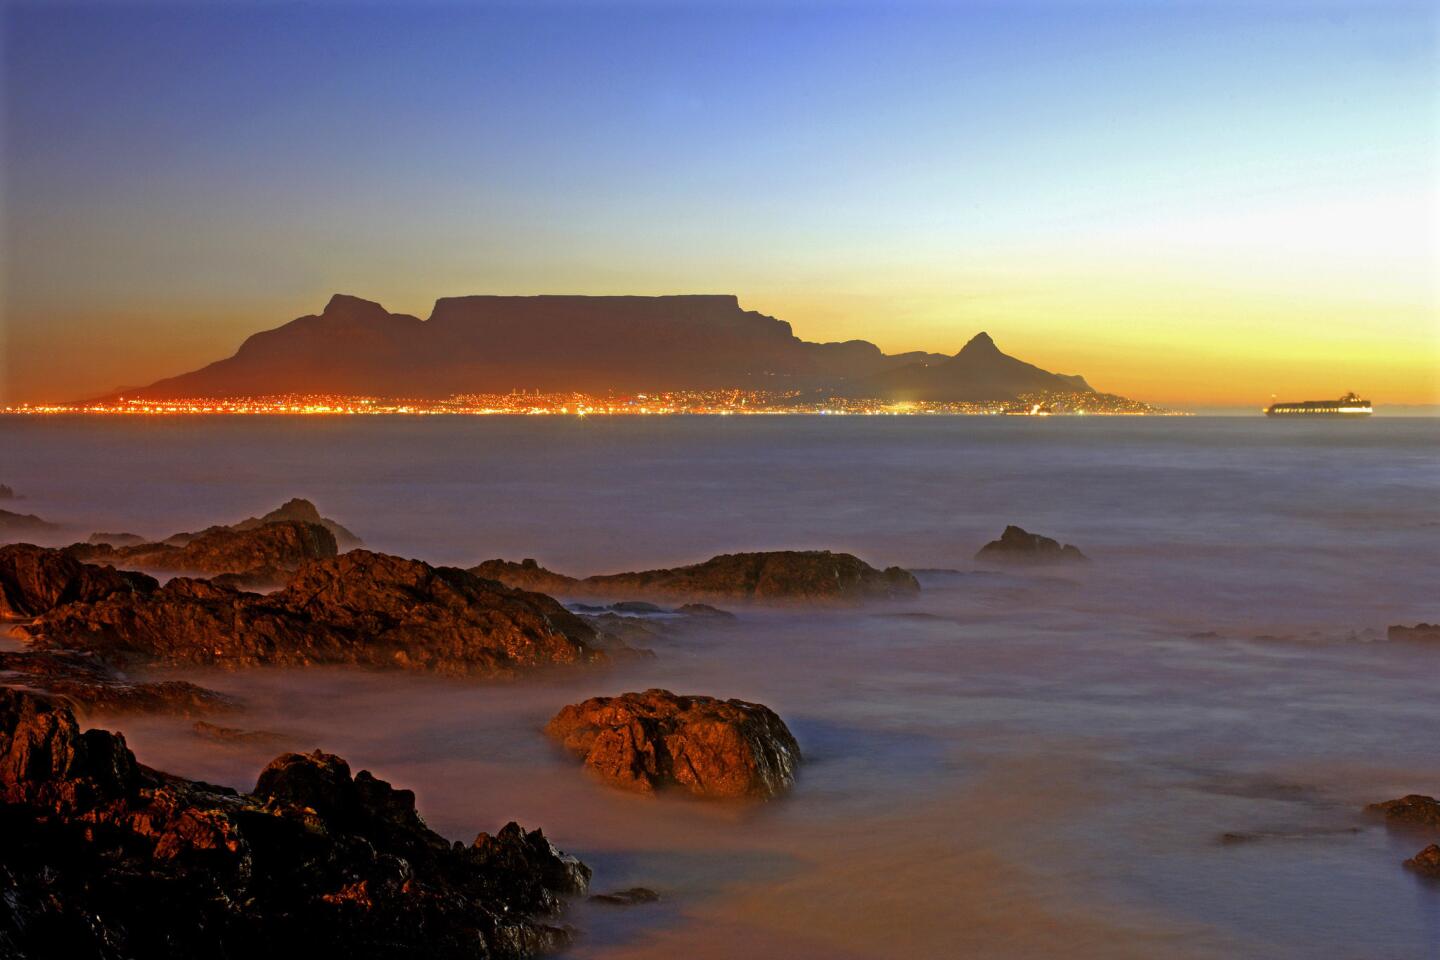 Cape Town at dusk